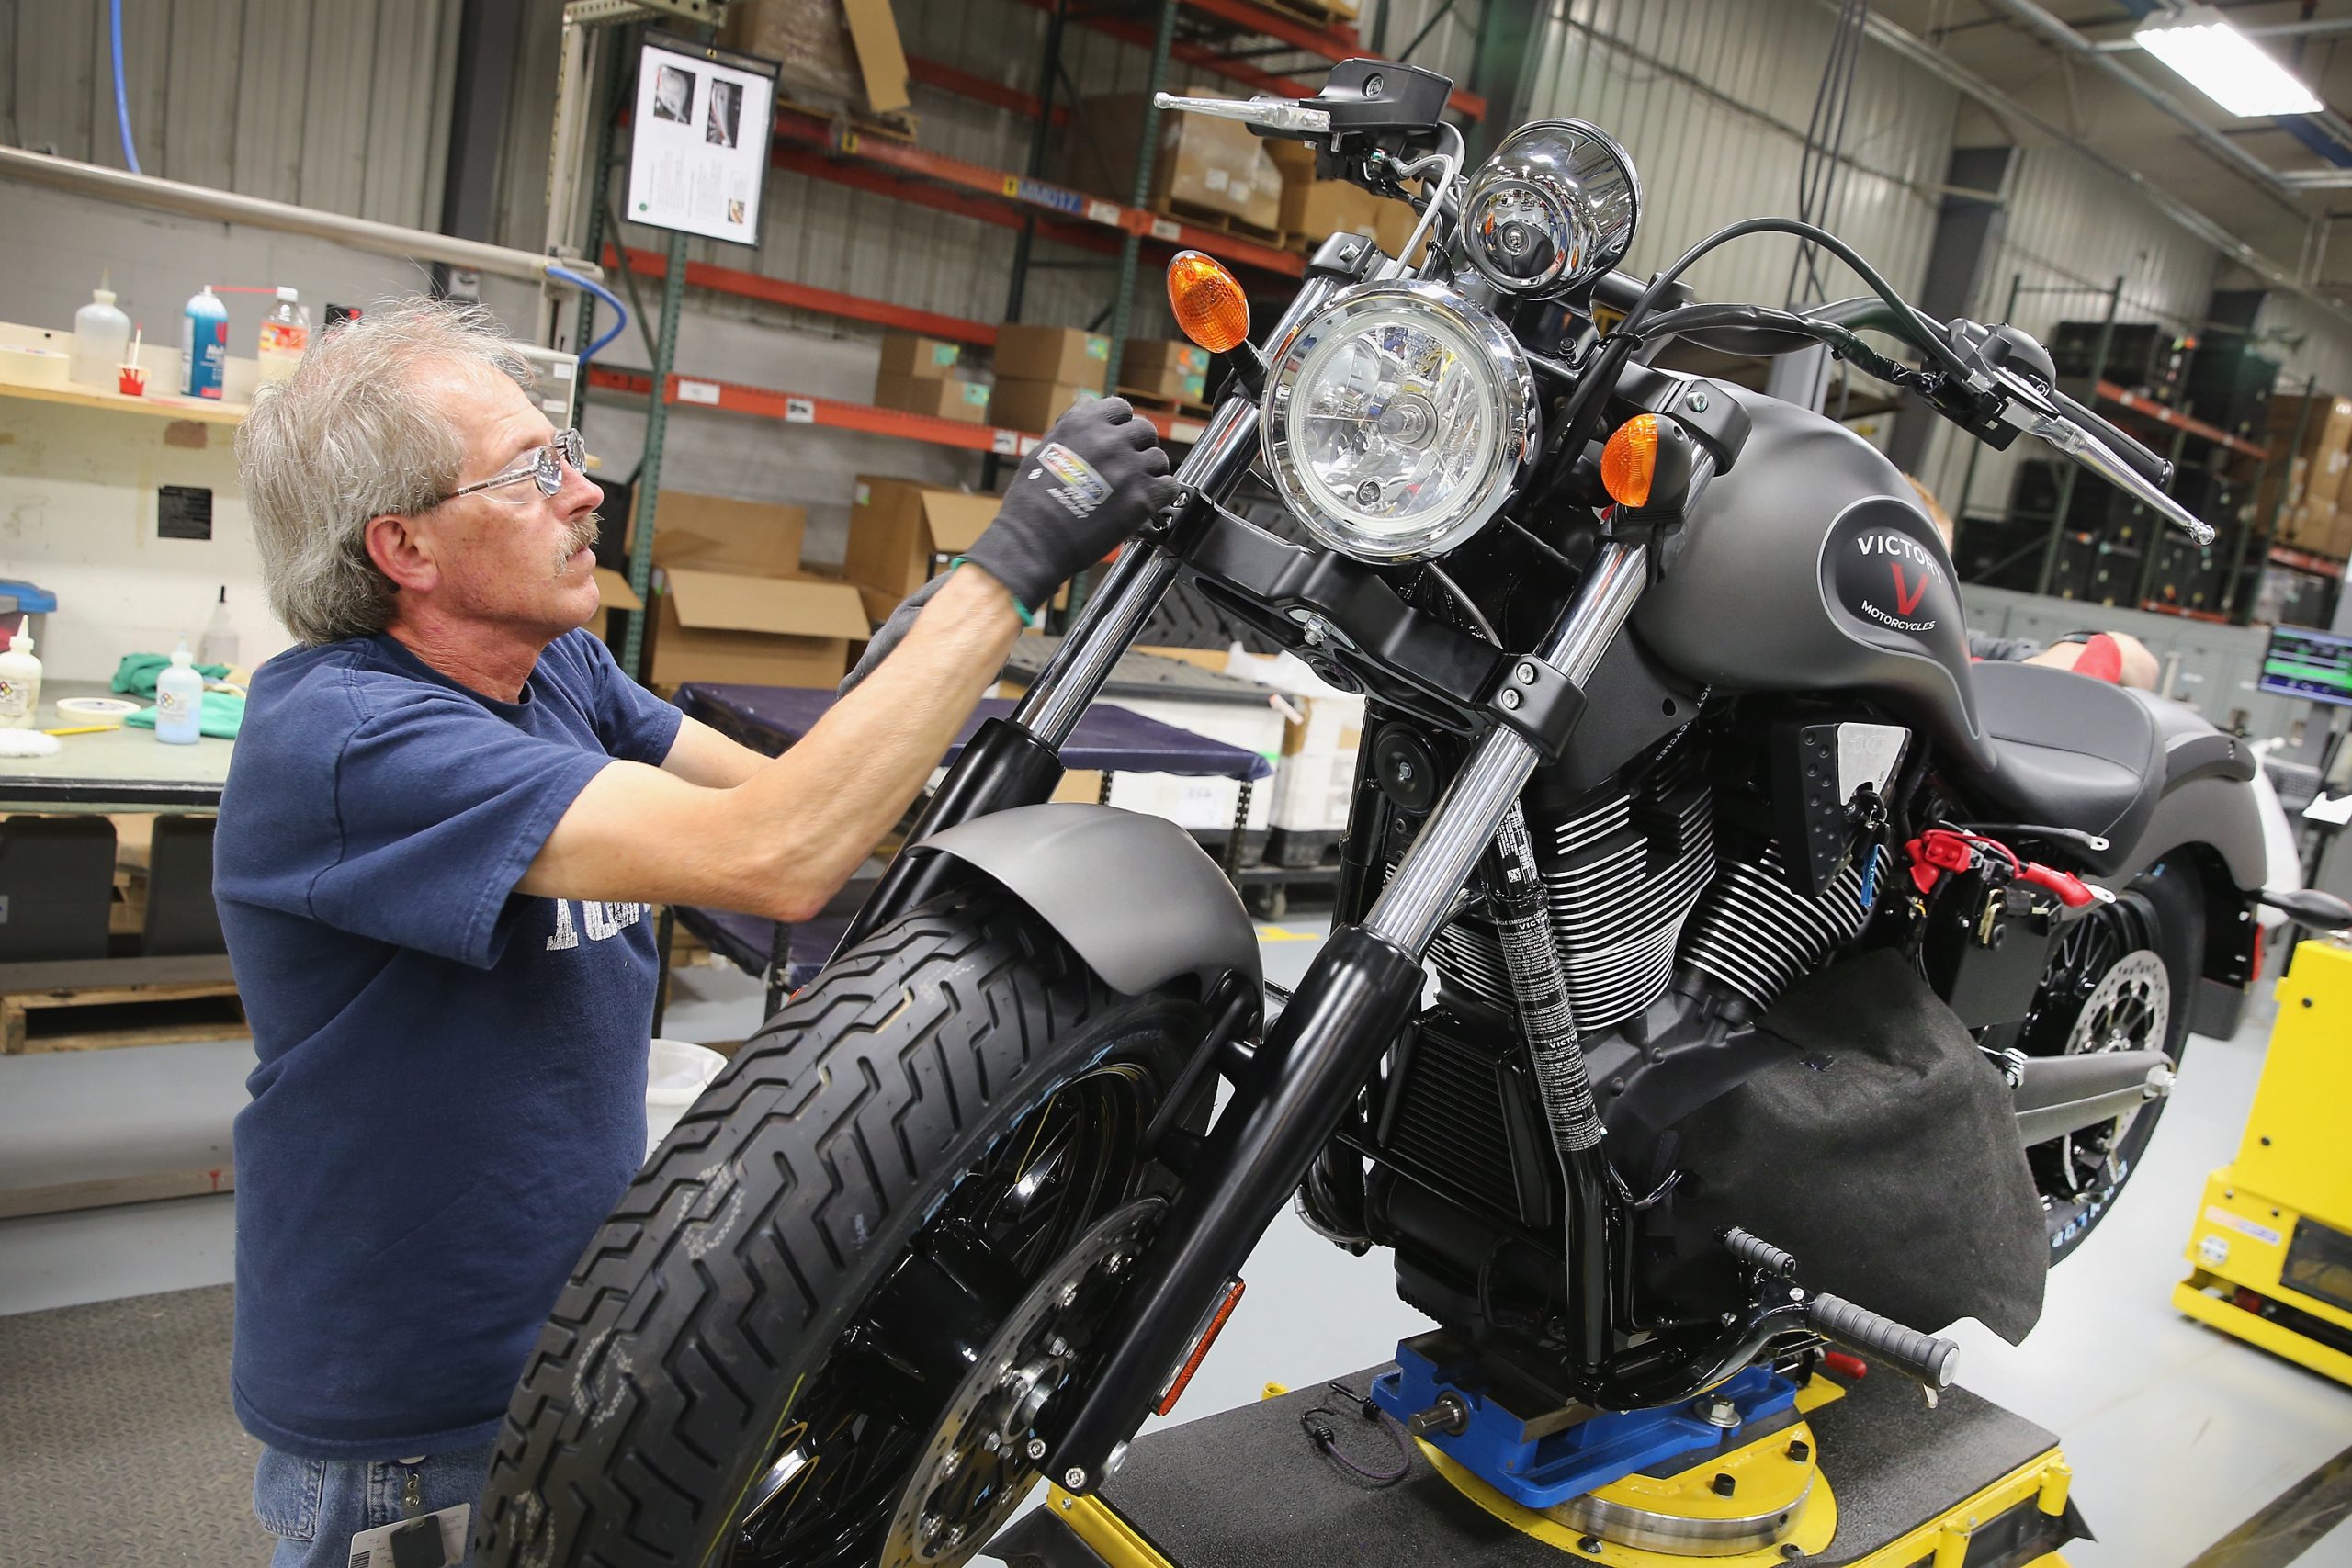 Man working on Victory motorcycle